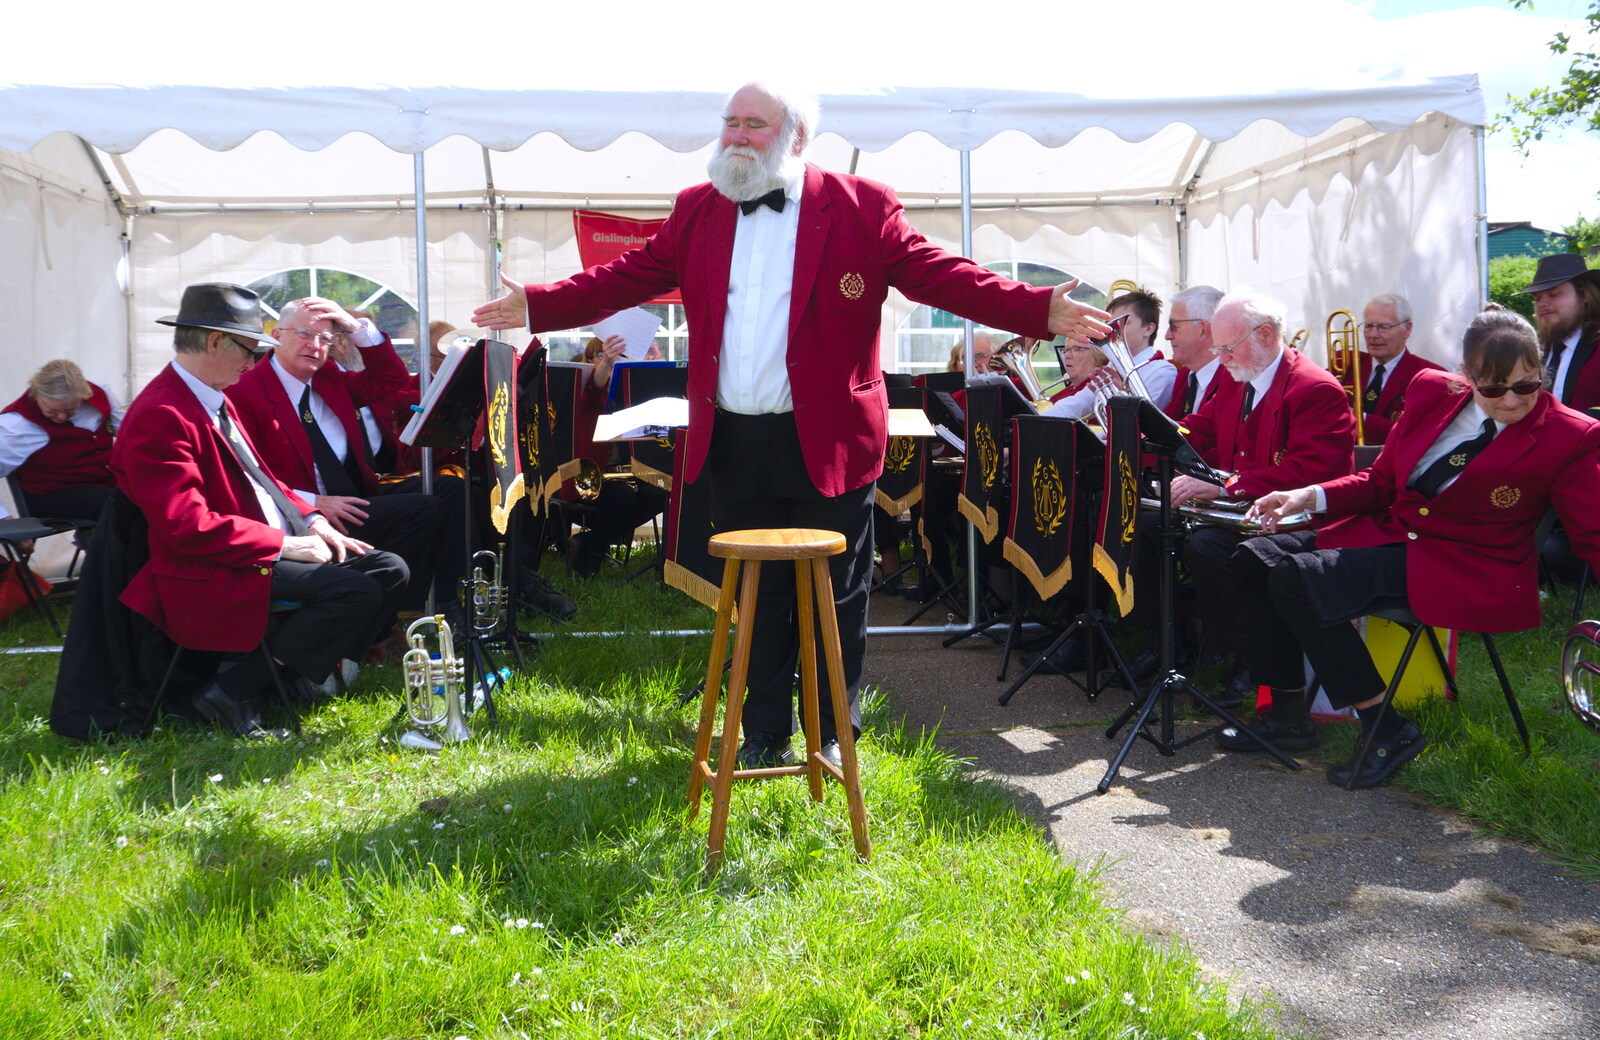 Adrian takes a bow from The Gislingham Silver Band at the Village Hall, Gislingham, Suffolk - 12th May 2019